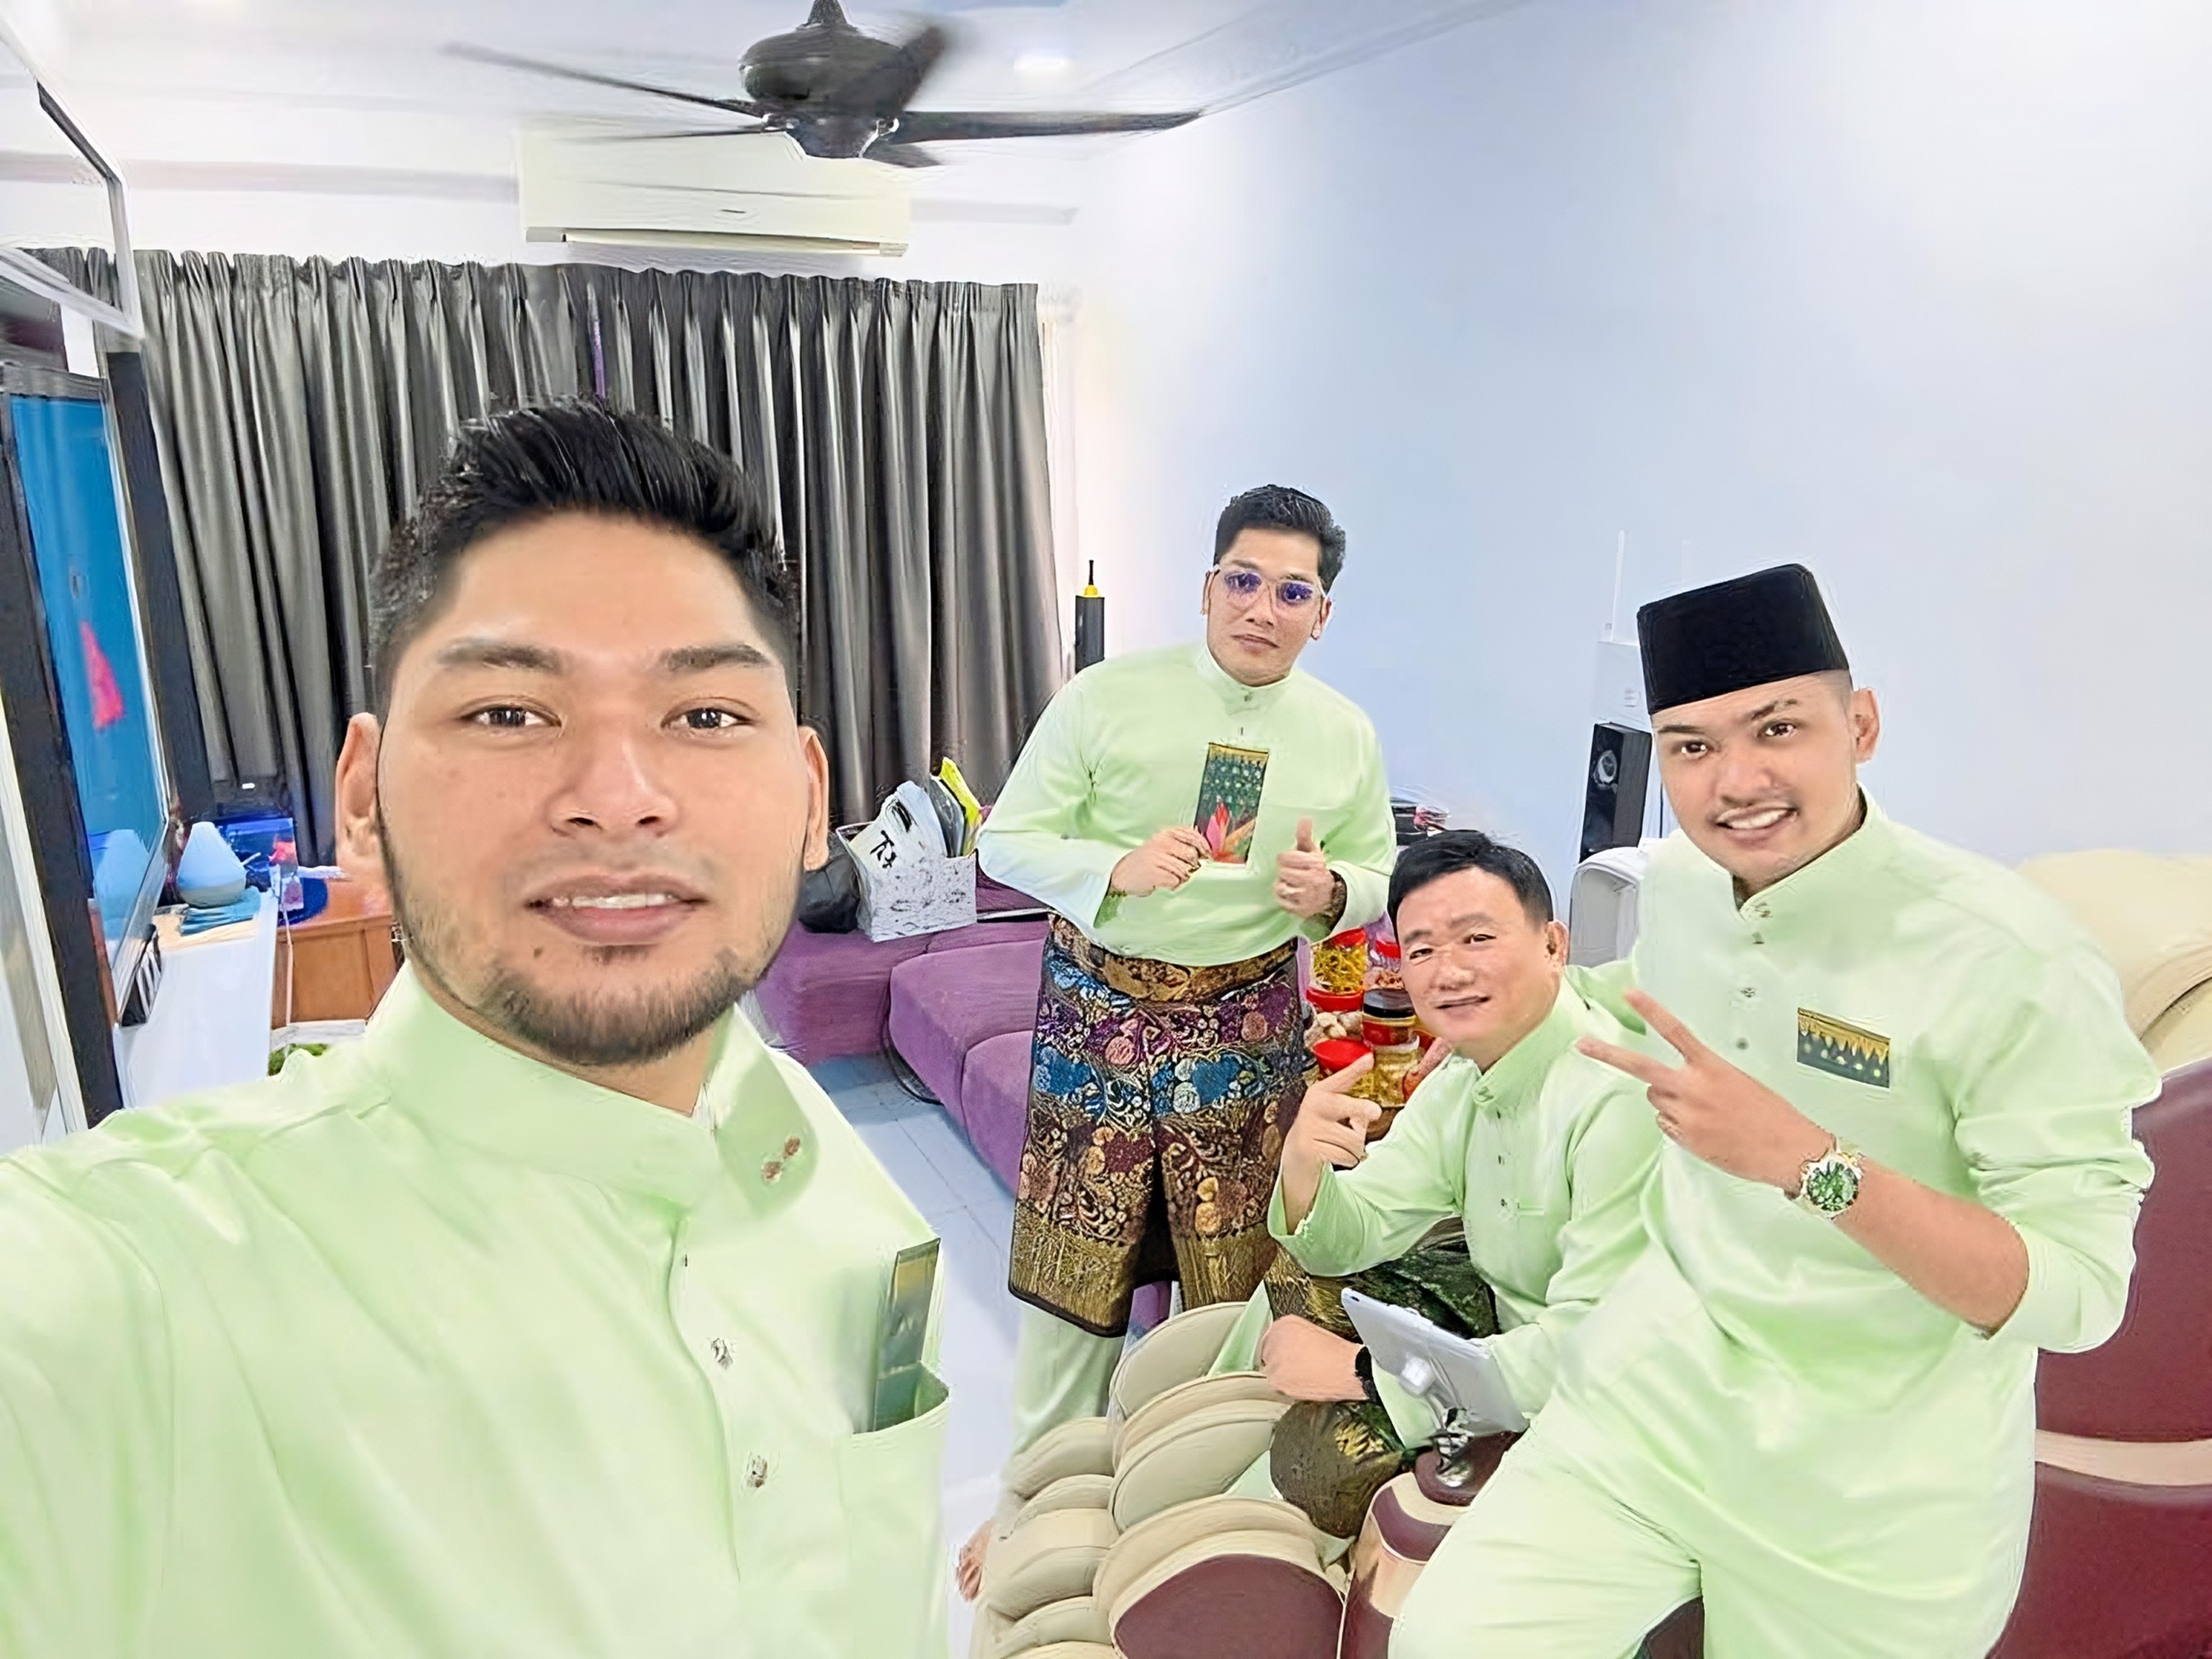 Michael Tong Wai Siong (second from right) with his adopted Malay sons (from left) Rasyid, Rafie and Abdul Rahman. Photo: Instagram/thestaronline